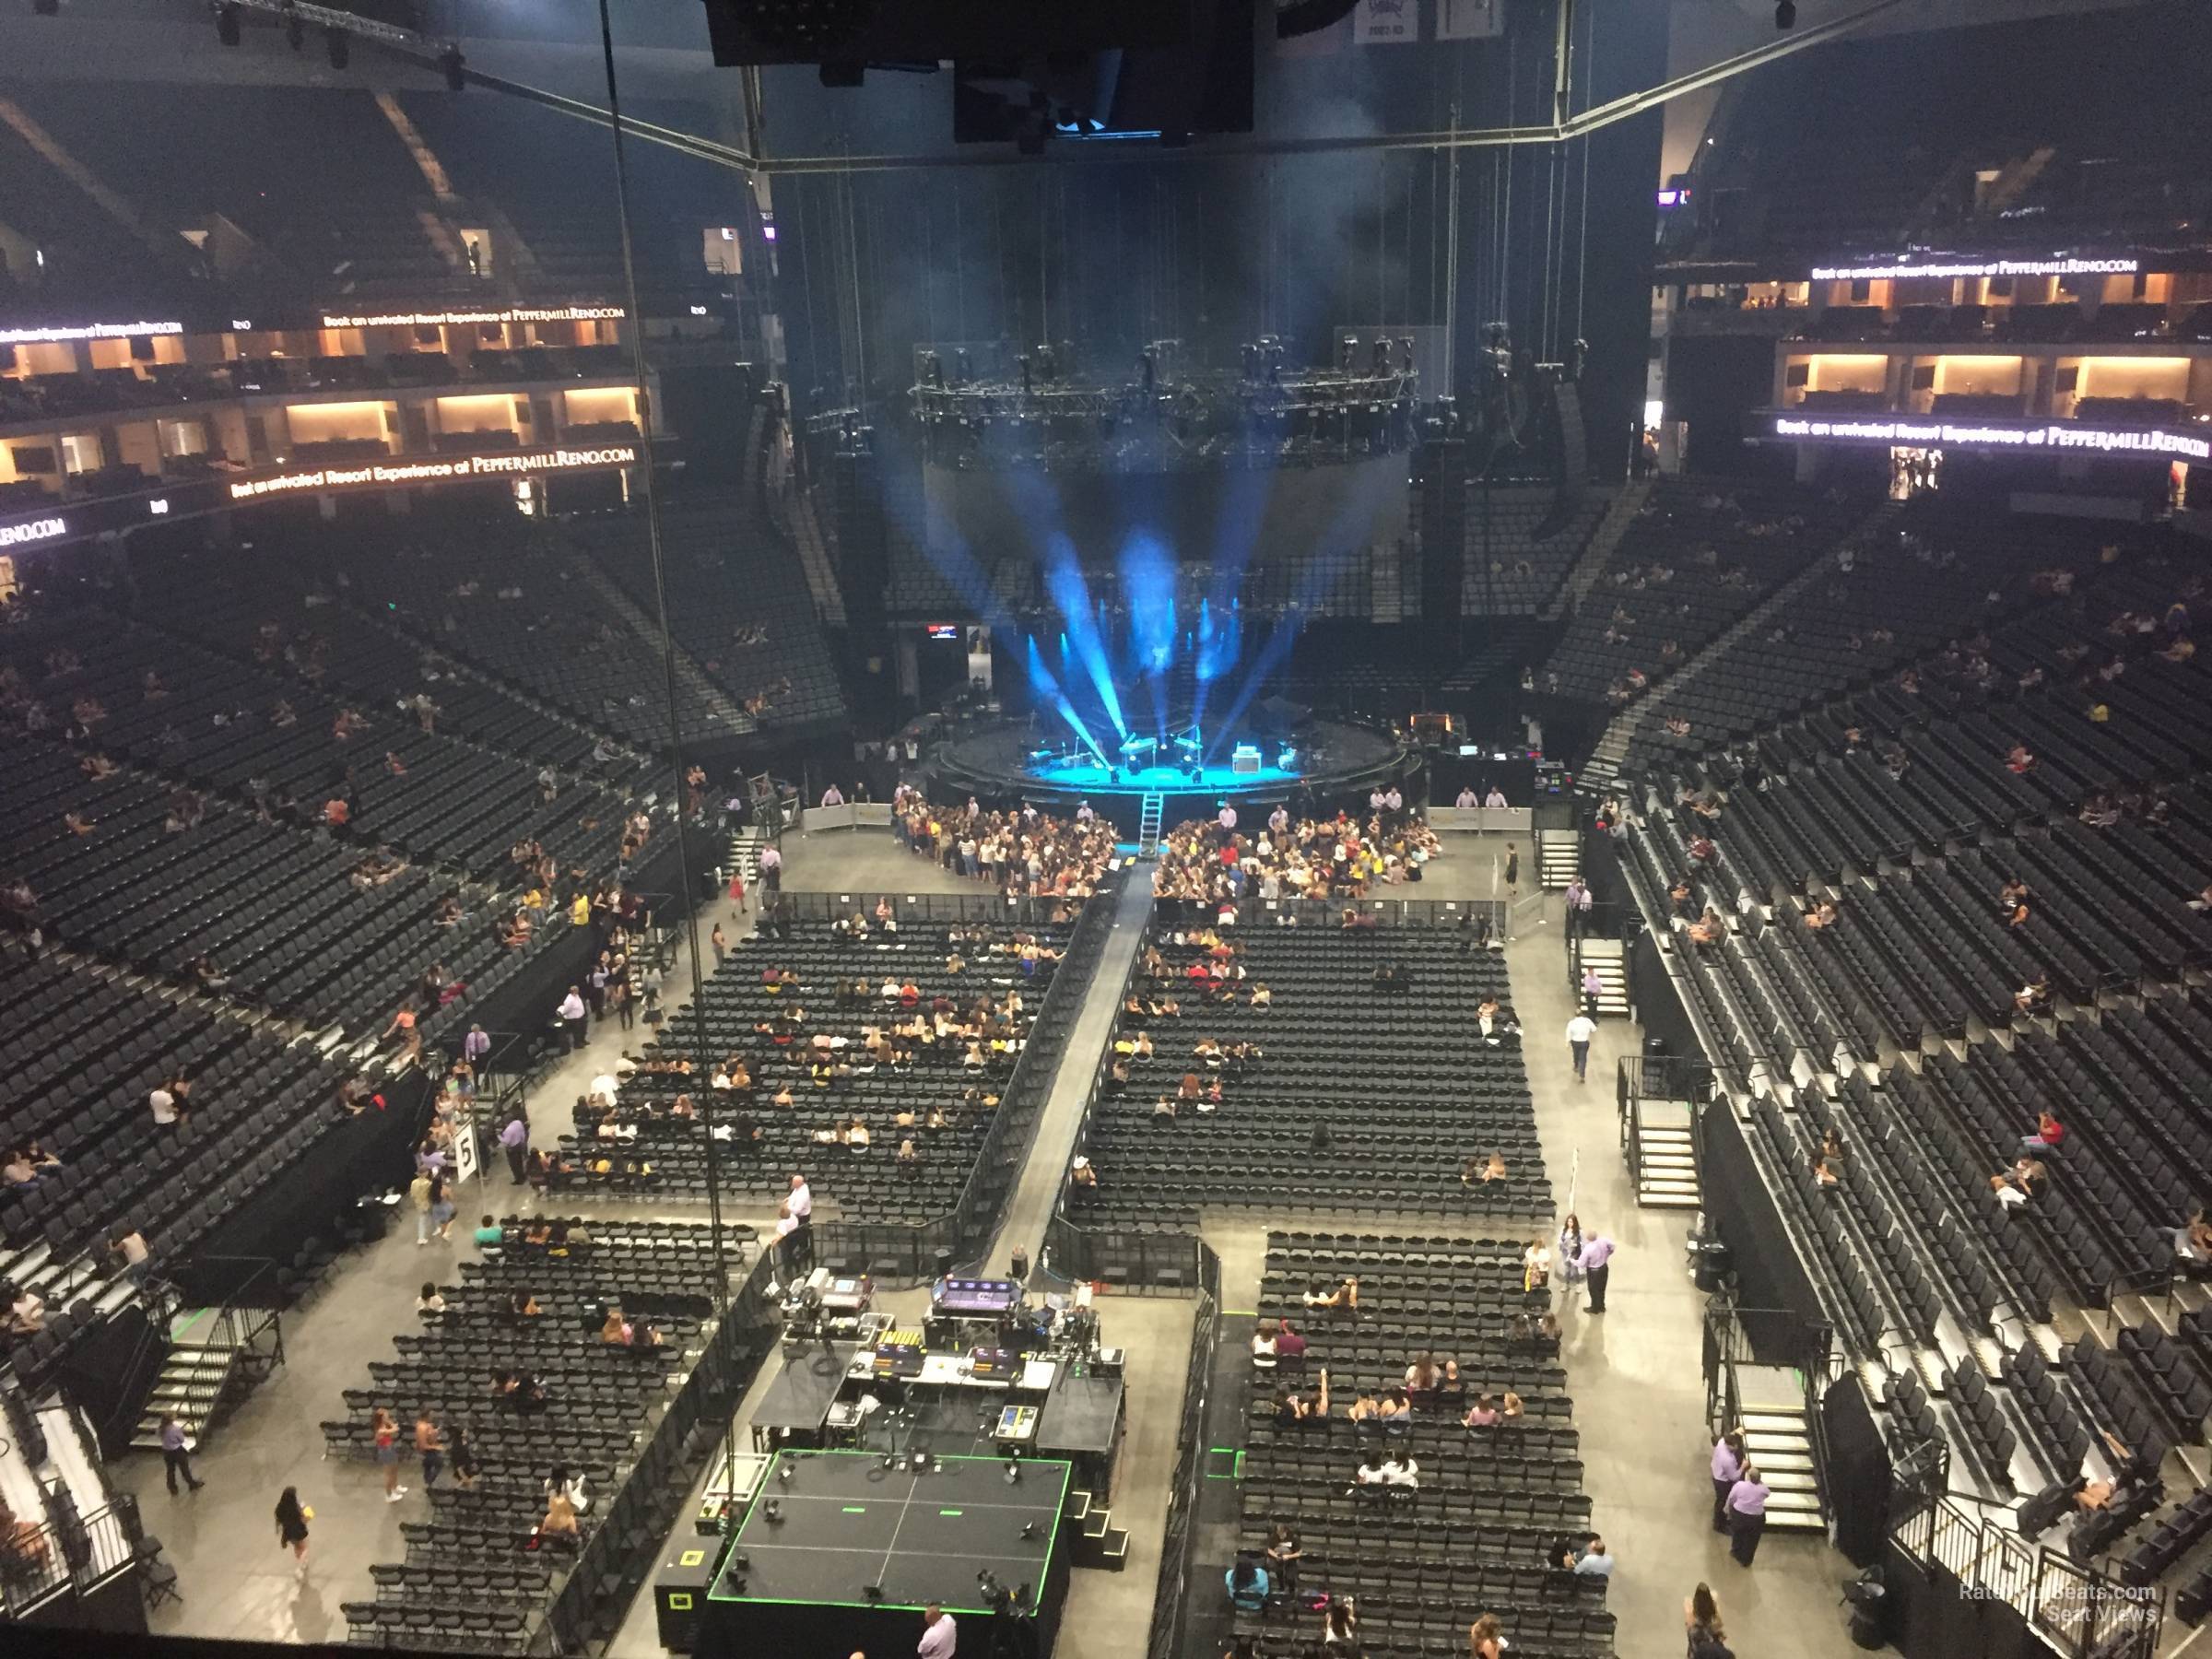 Section 211 at Golden 1 Center